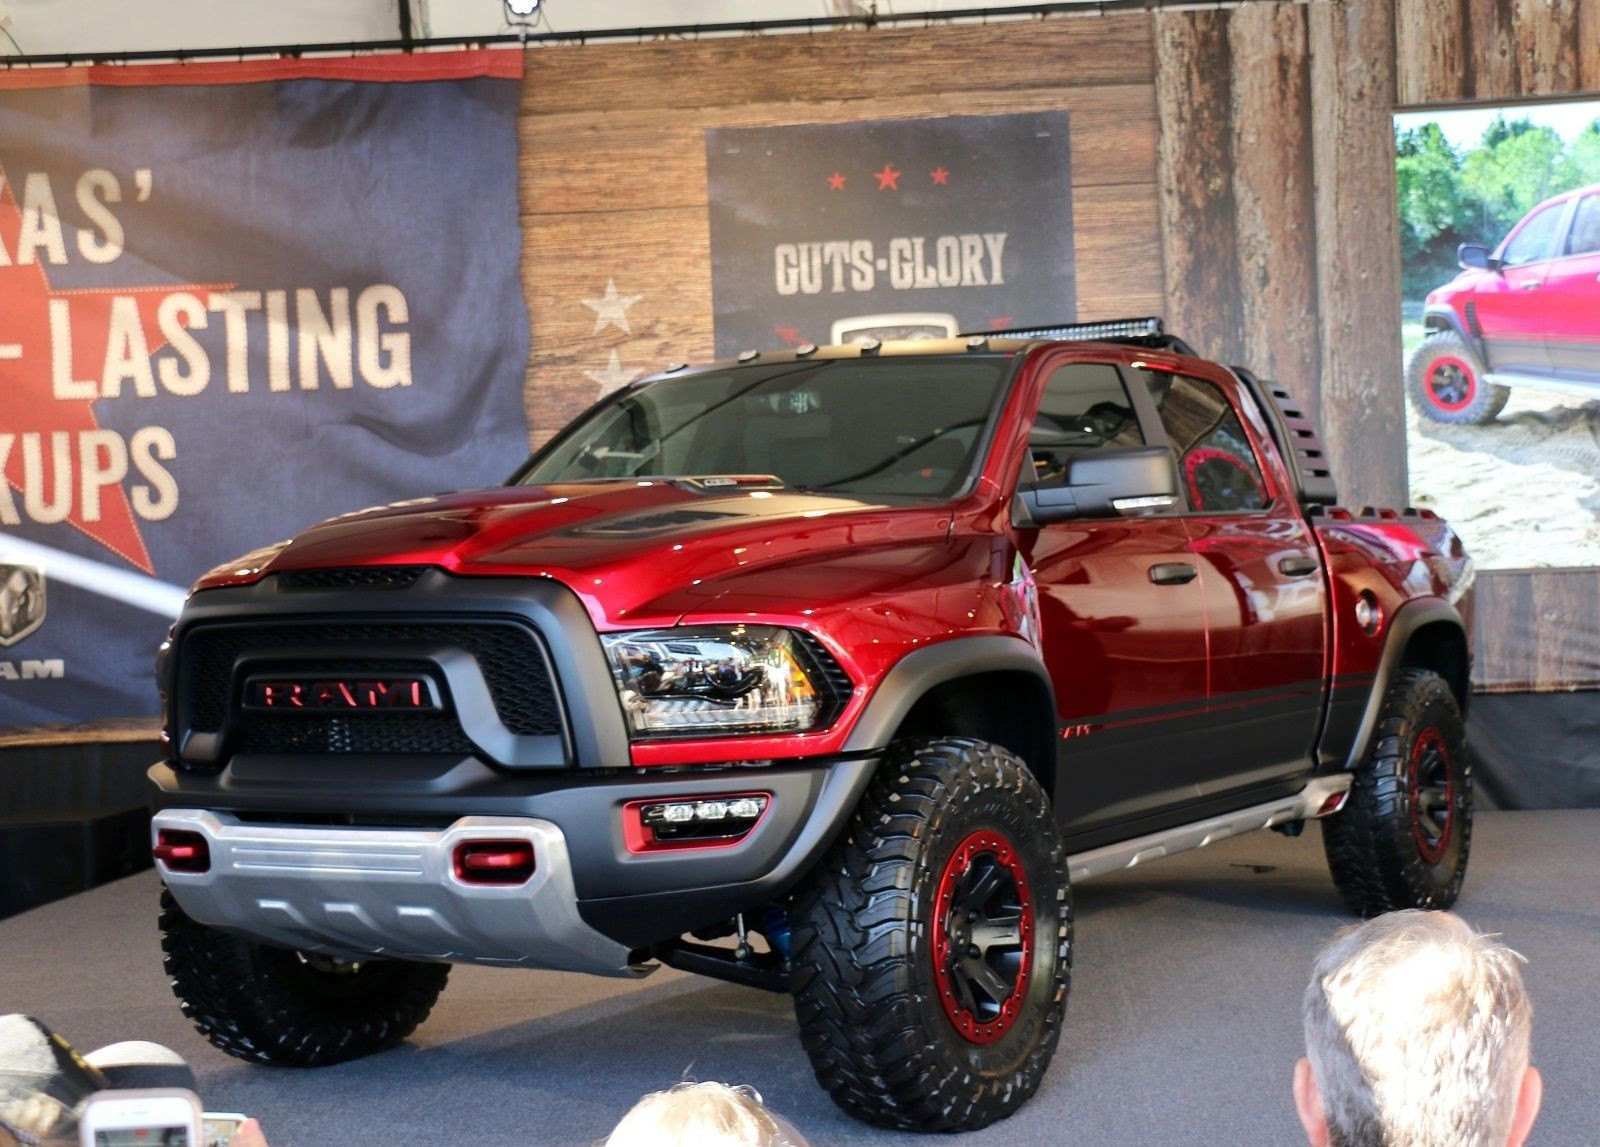 Gallery of 2020 Dodge Ram Rebel Trx Style for 2020 Dodge Ram Rebel Trx Review, Car Review